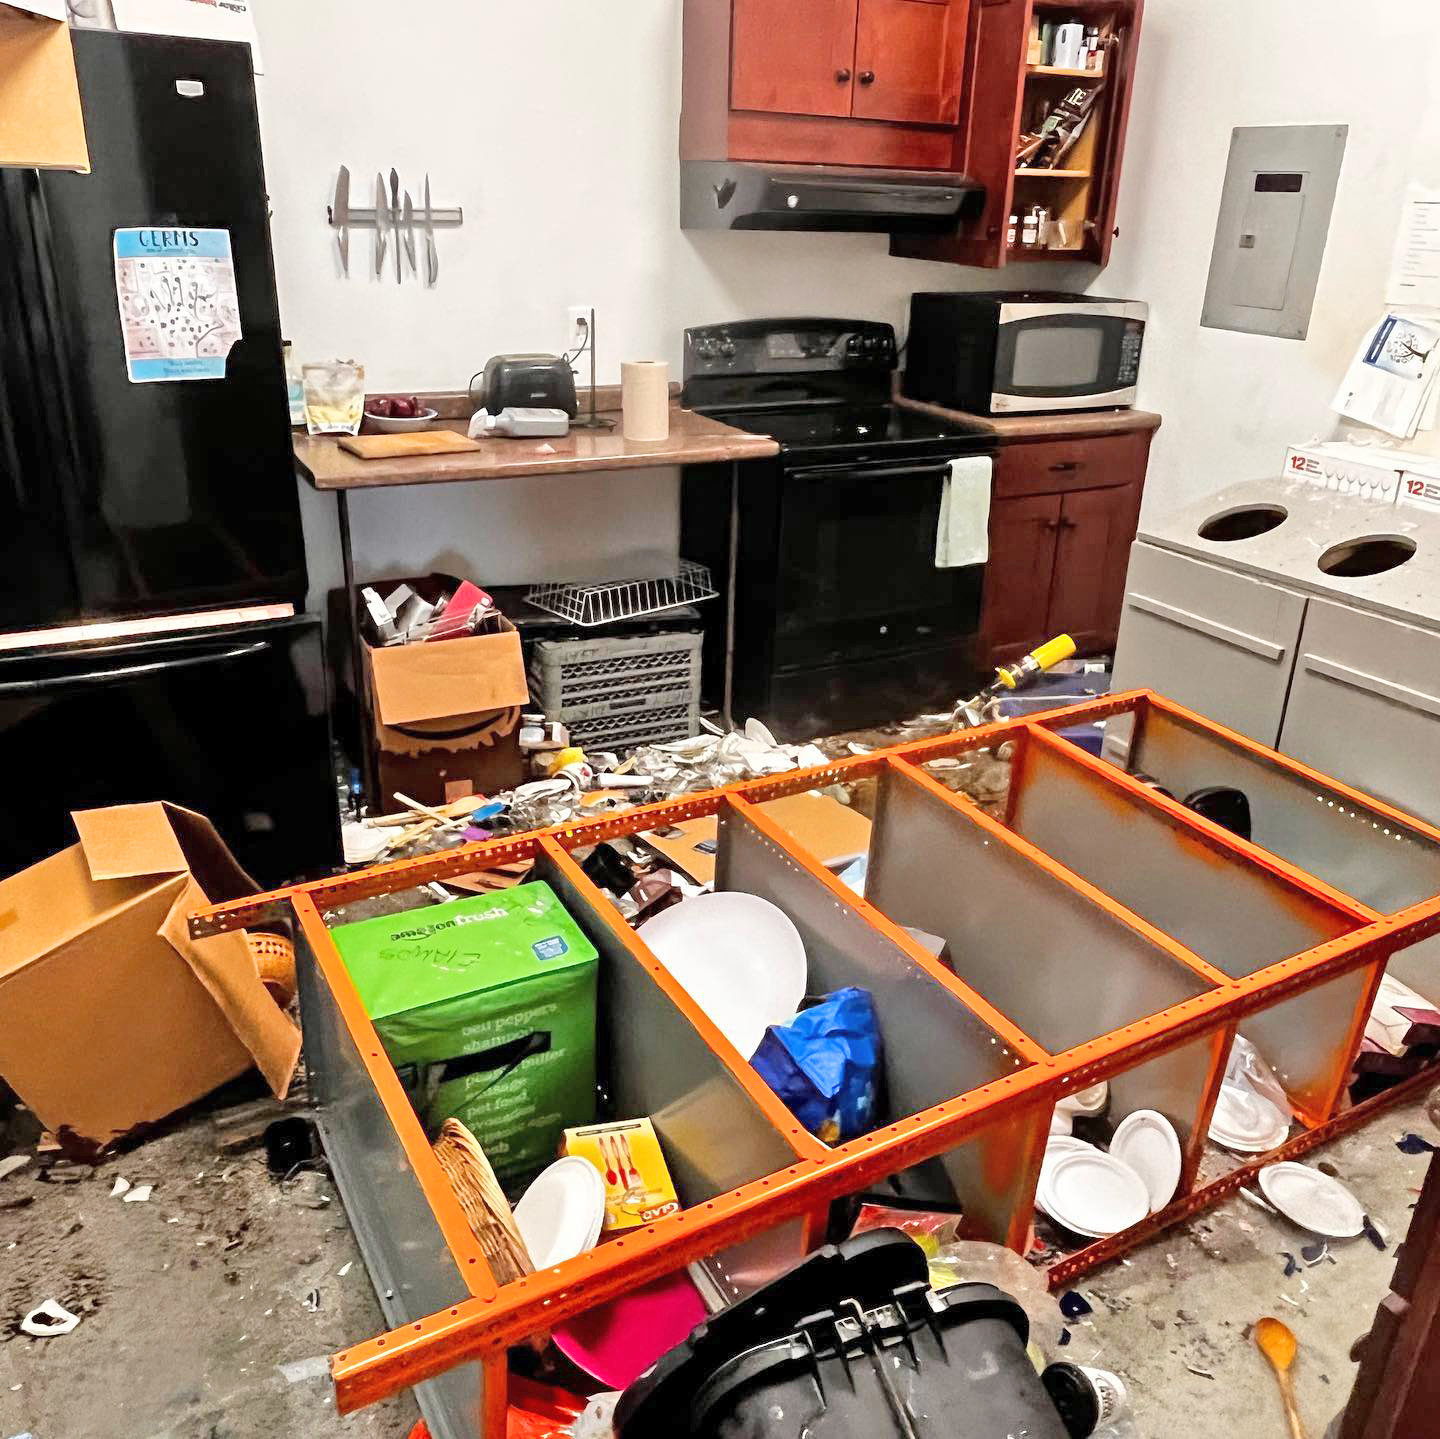 Officials said a group of vandals broke into the Gates Street facility and used paint, torches, hammers and other studio items to tear through multiple rooms, breaking property, furniture and artworks.